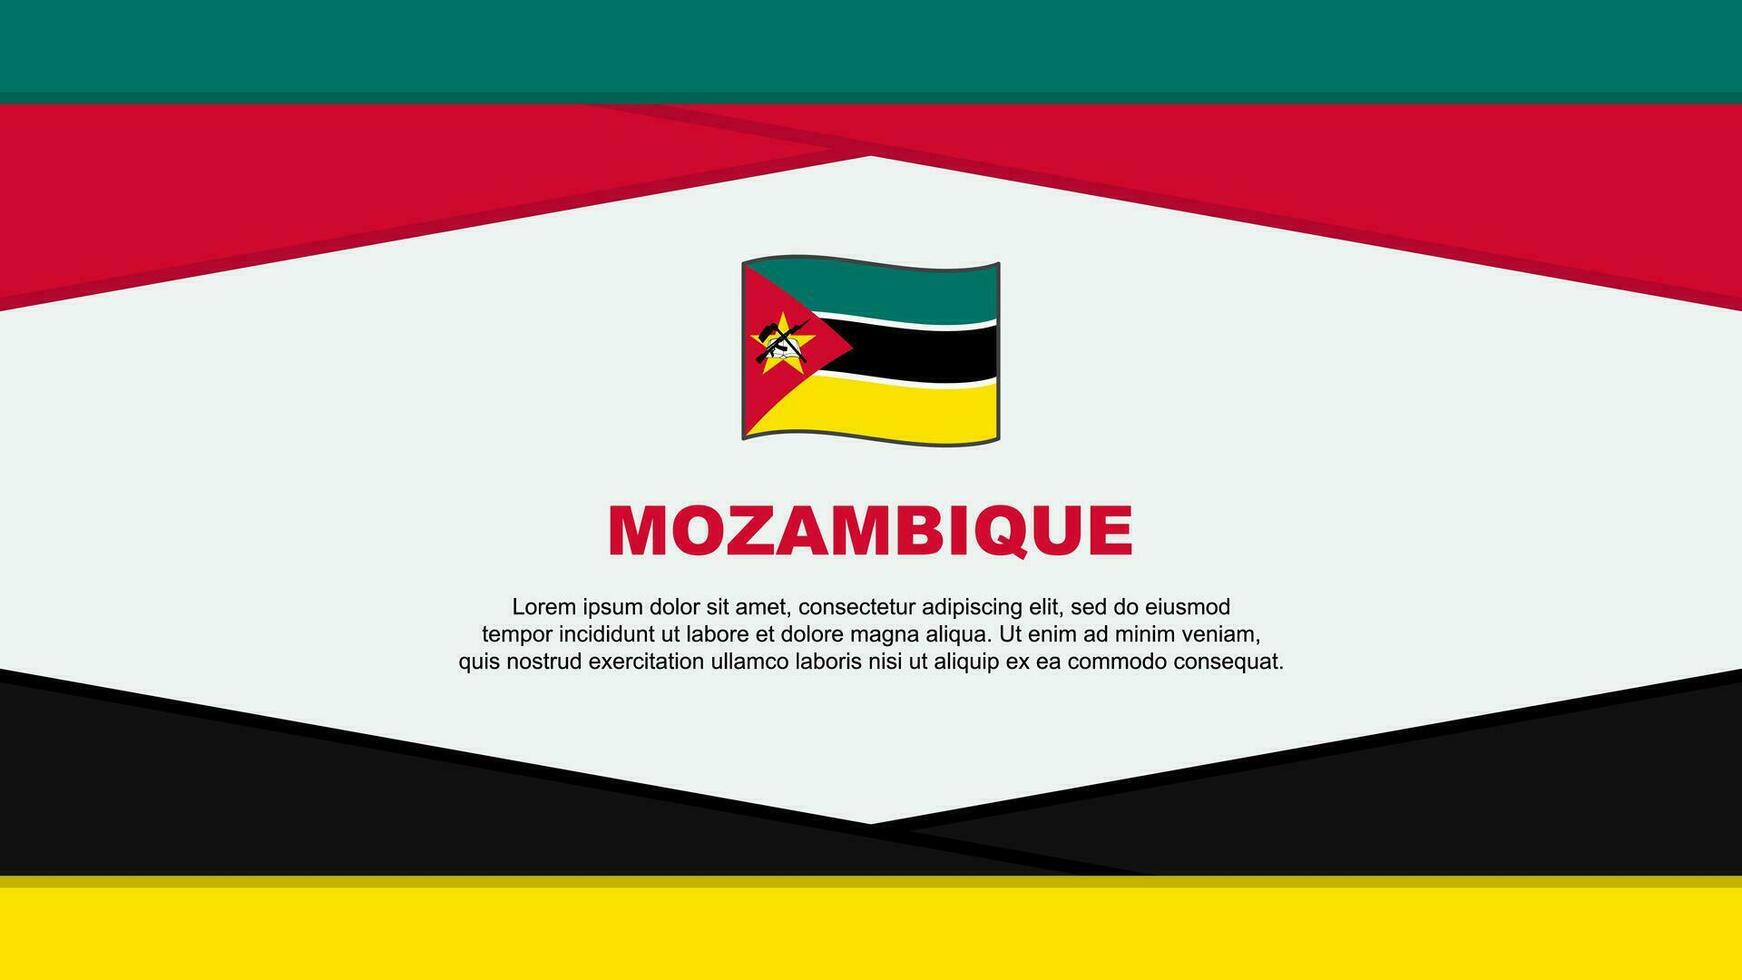 Mozambique Flag Abstract Background Design Template. Mozambique Independence Day Banner Cartoon Vector Illustration. Mozambique Vector